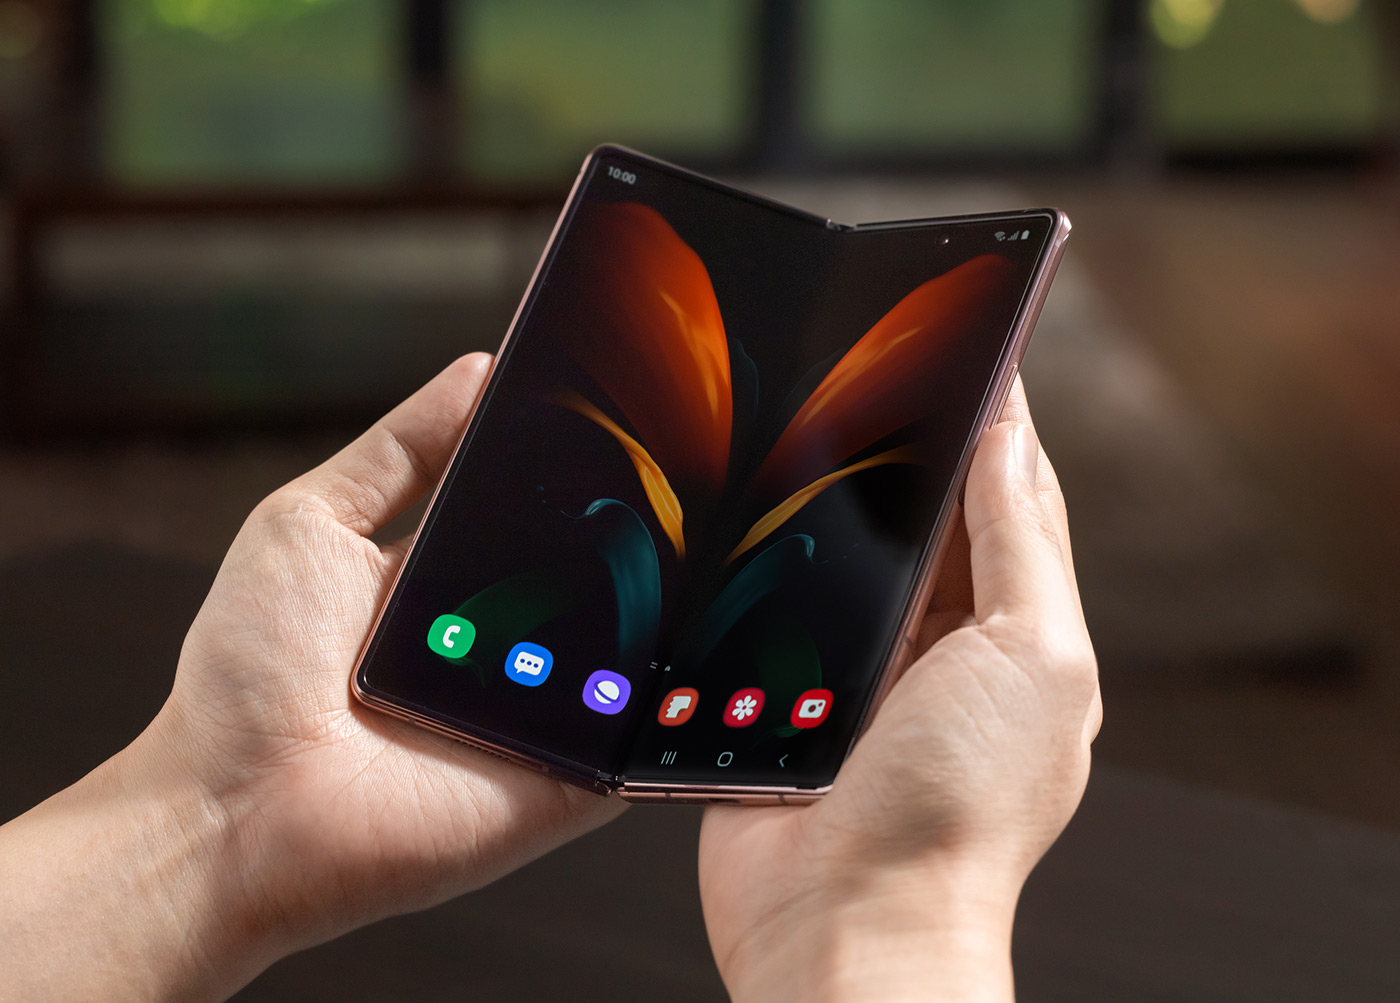 Galaxy Z Fold2 first look, unique features in detail